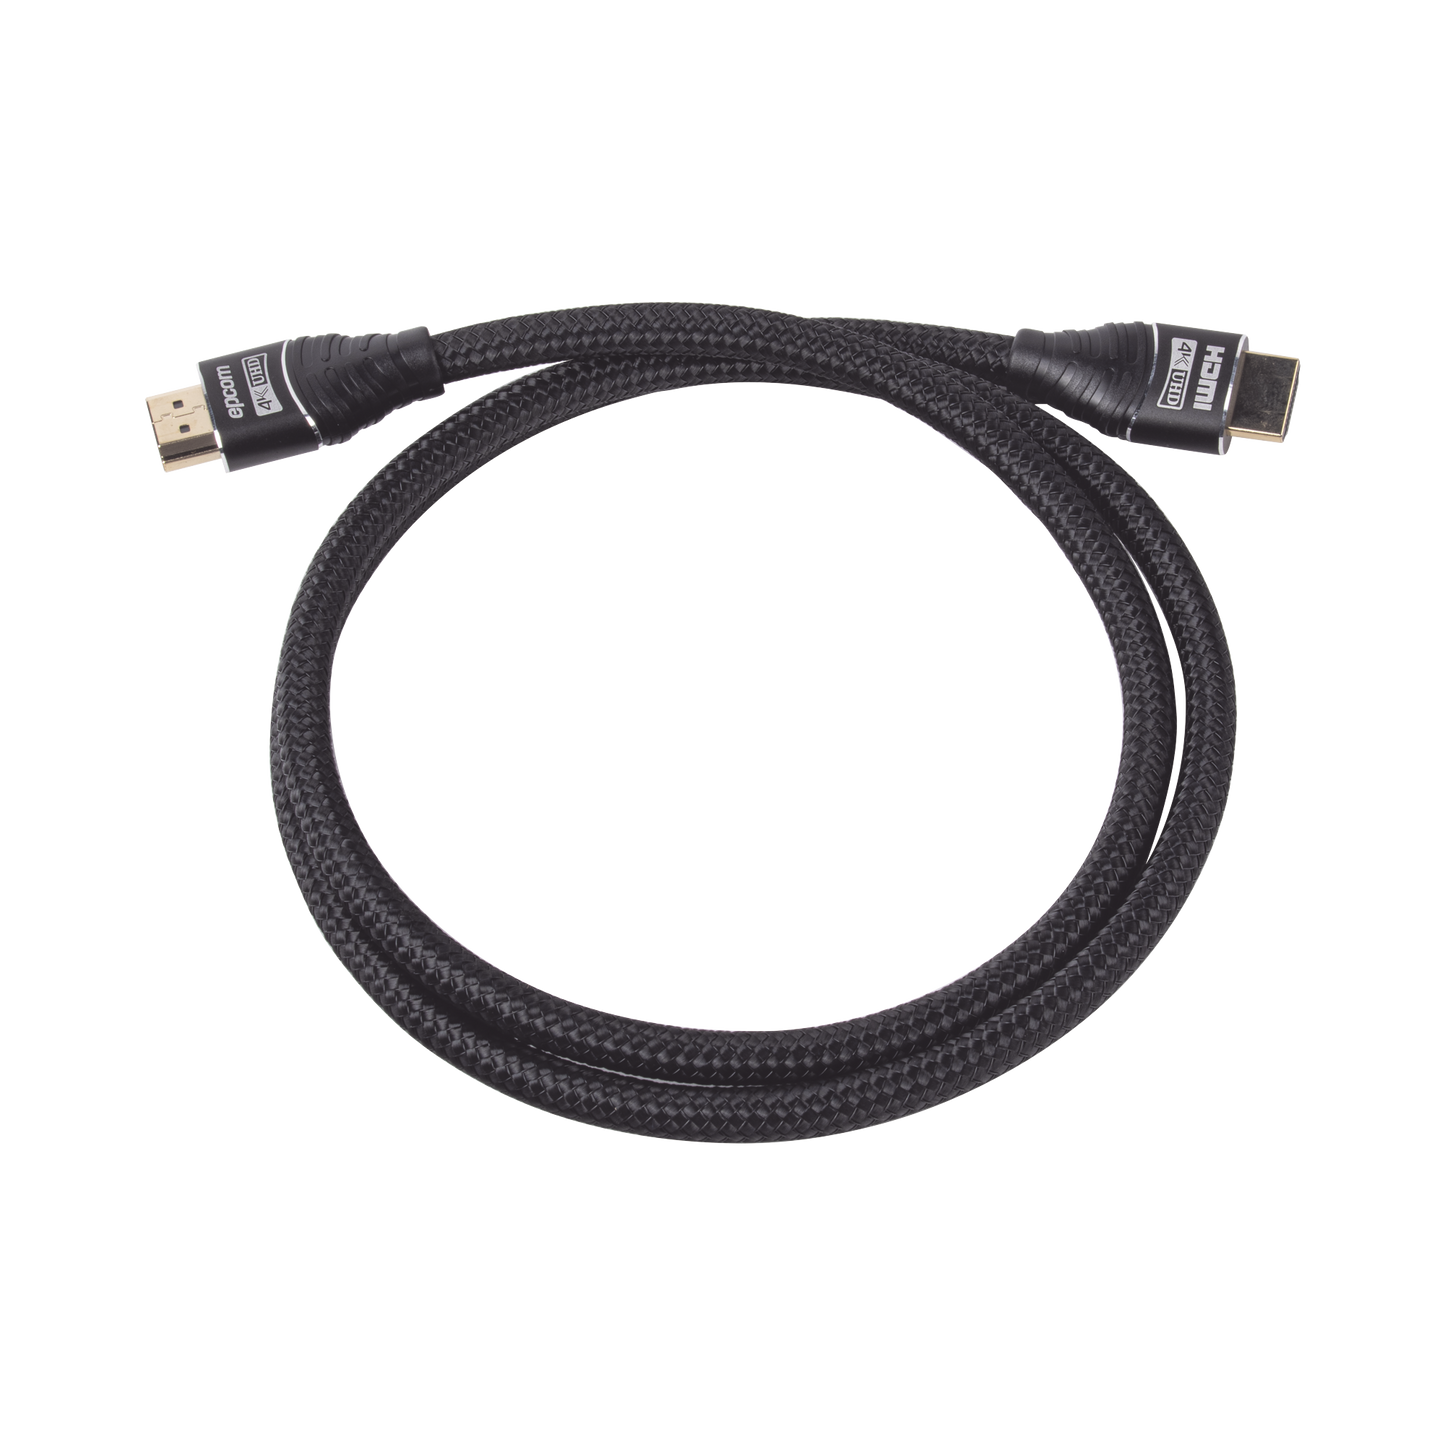 Cable  HDMI Round 1m ( 3.28 ft ) optimized for 4K ULTRA HD